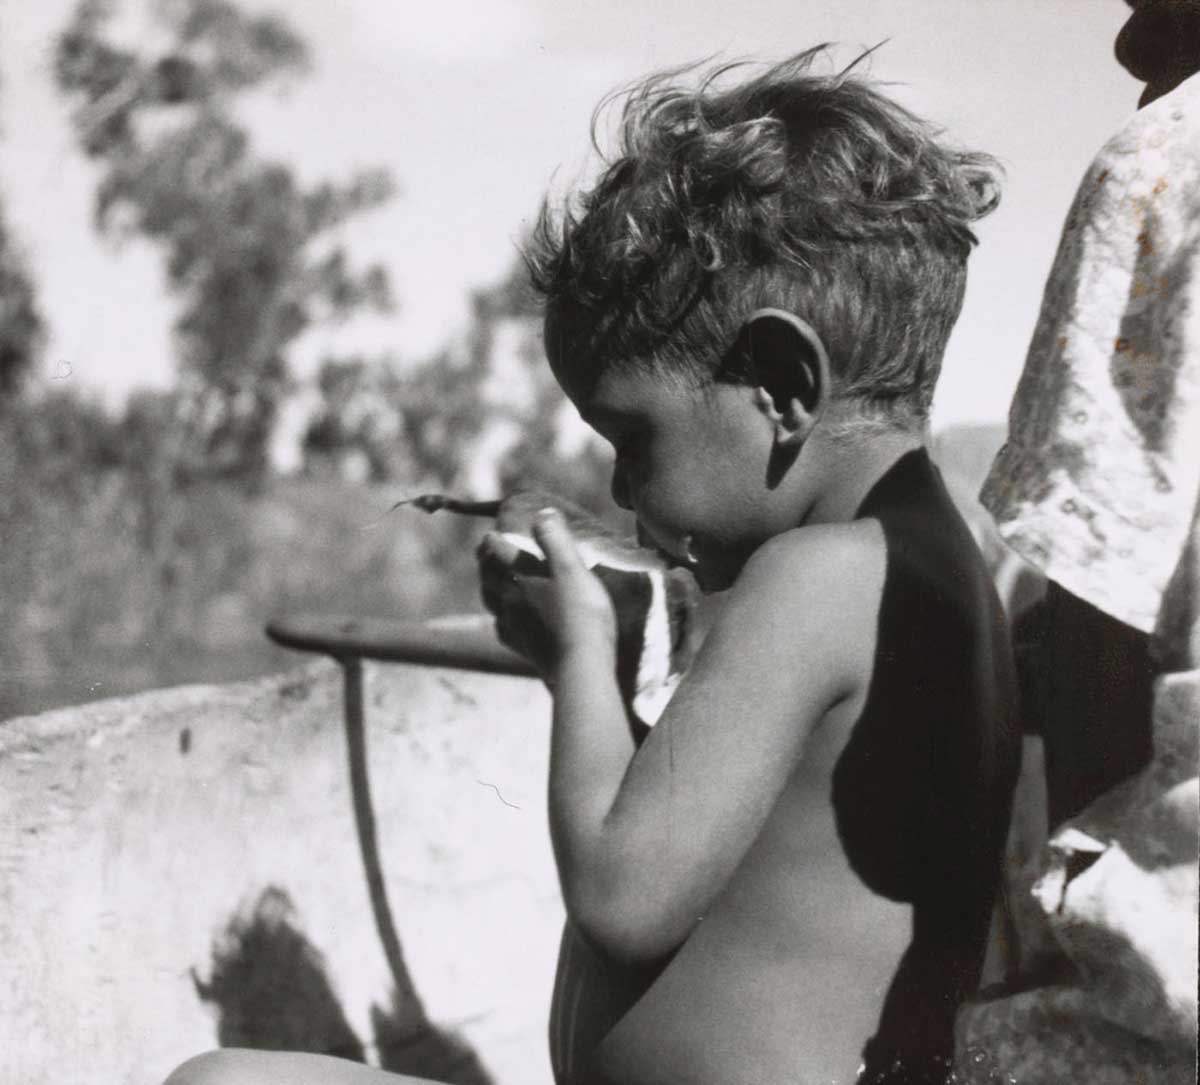 A black and white photograph that depicts an Aboriginal boy sitting in a canoe eating a piece of watermelon. - click to view larger image